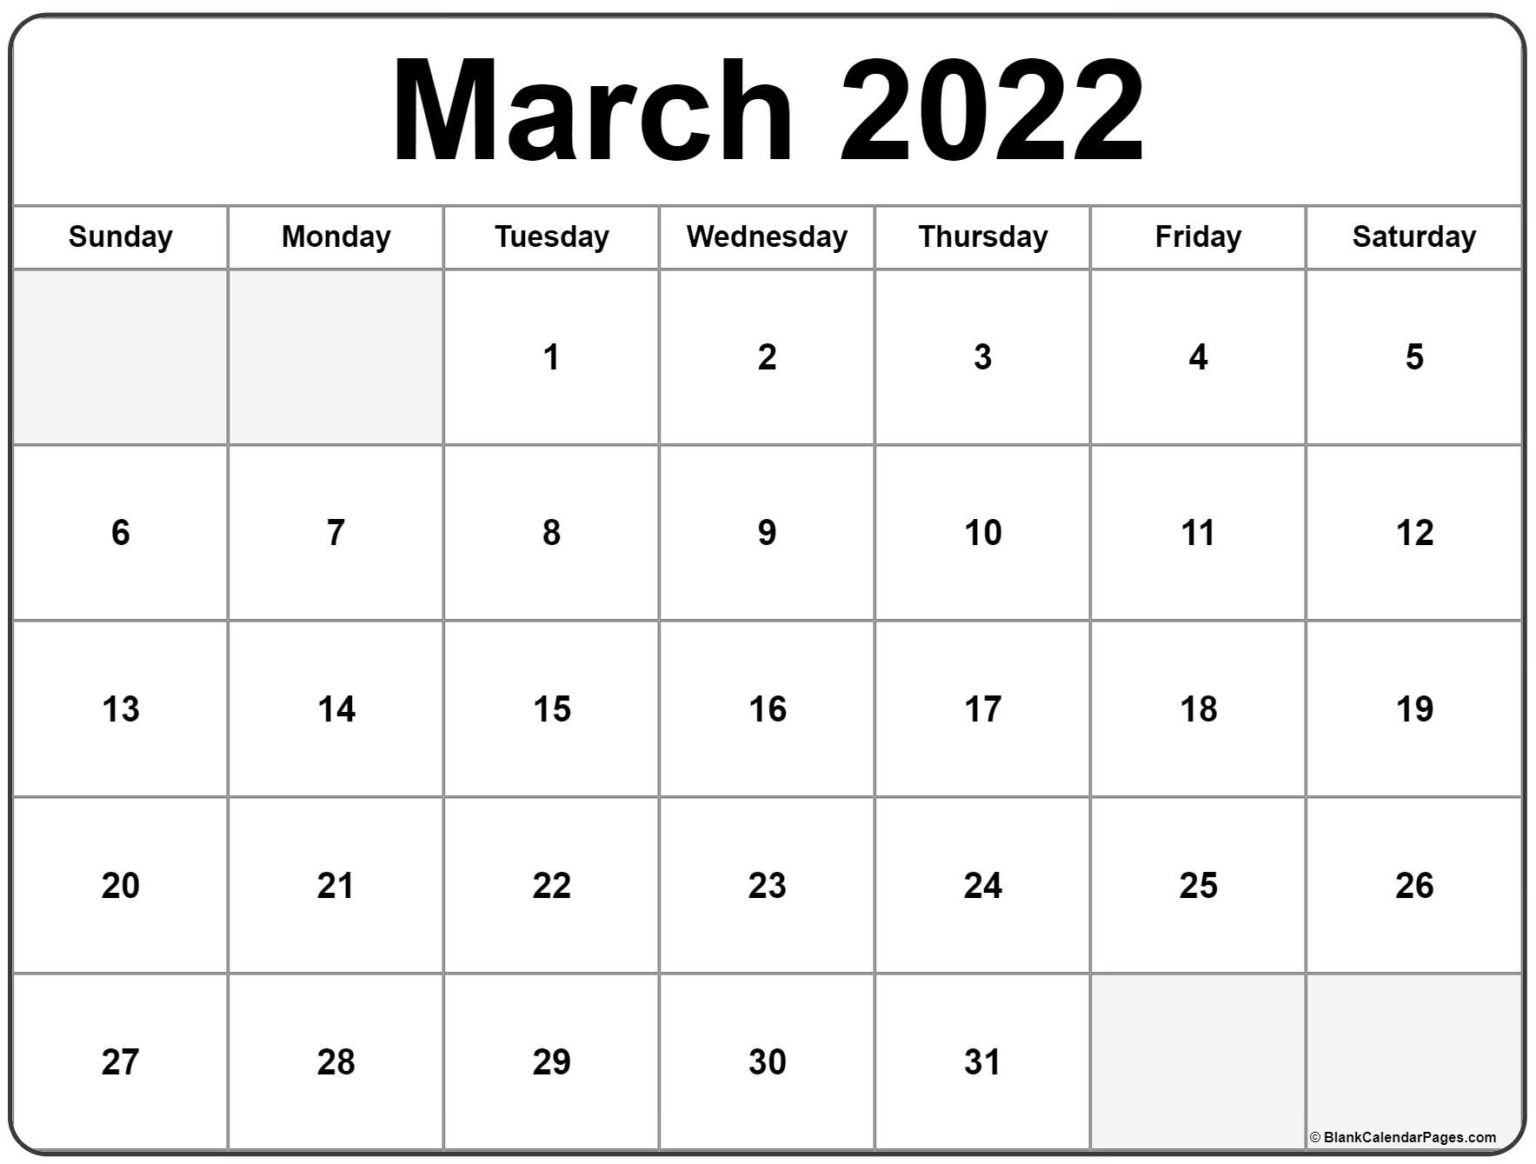 Fillable Printable Calendar March 2022 - Monthly Calendars